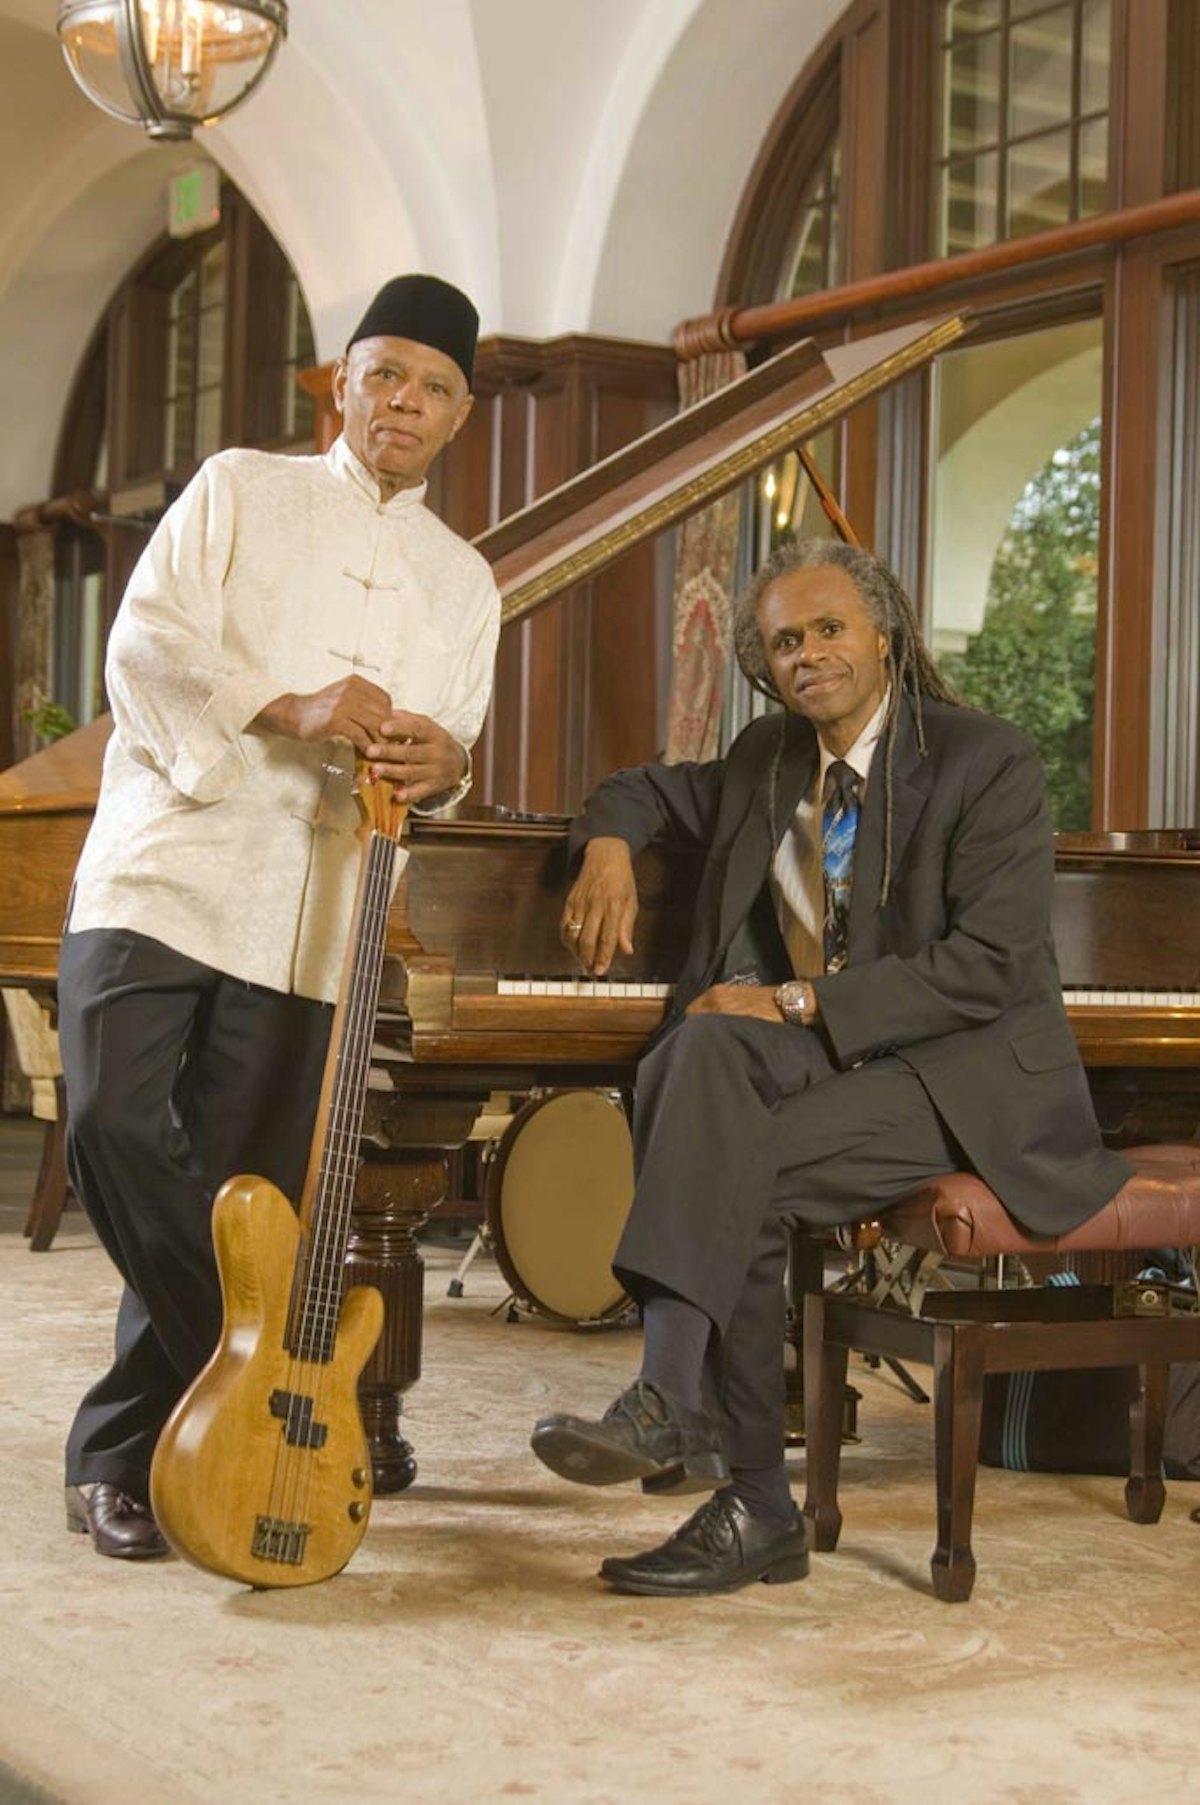 Bass player Phil Morrison and pianist Keith Williams composed "Beijing Olympics Hao Yuing."